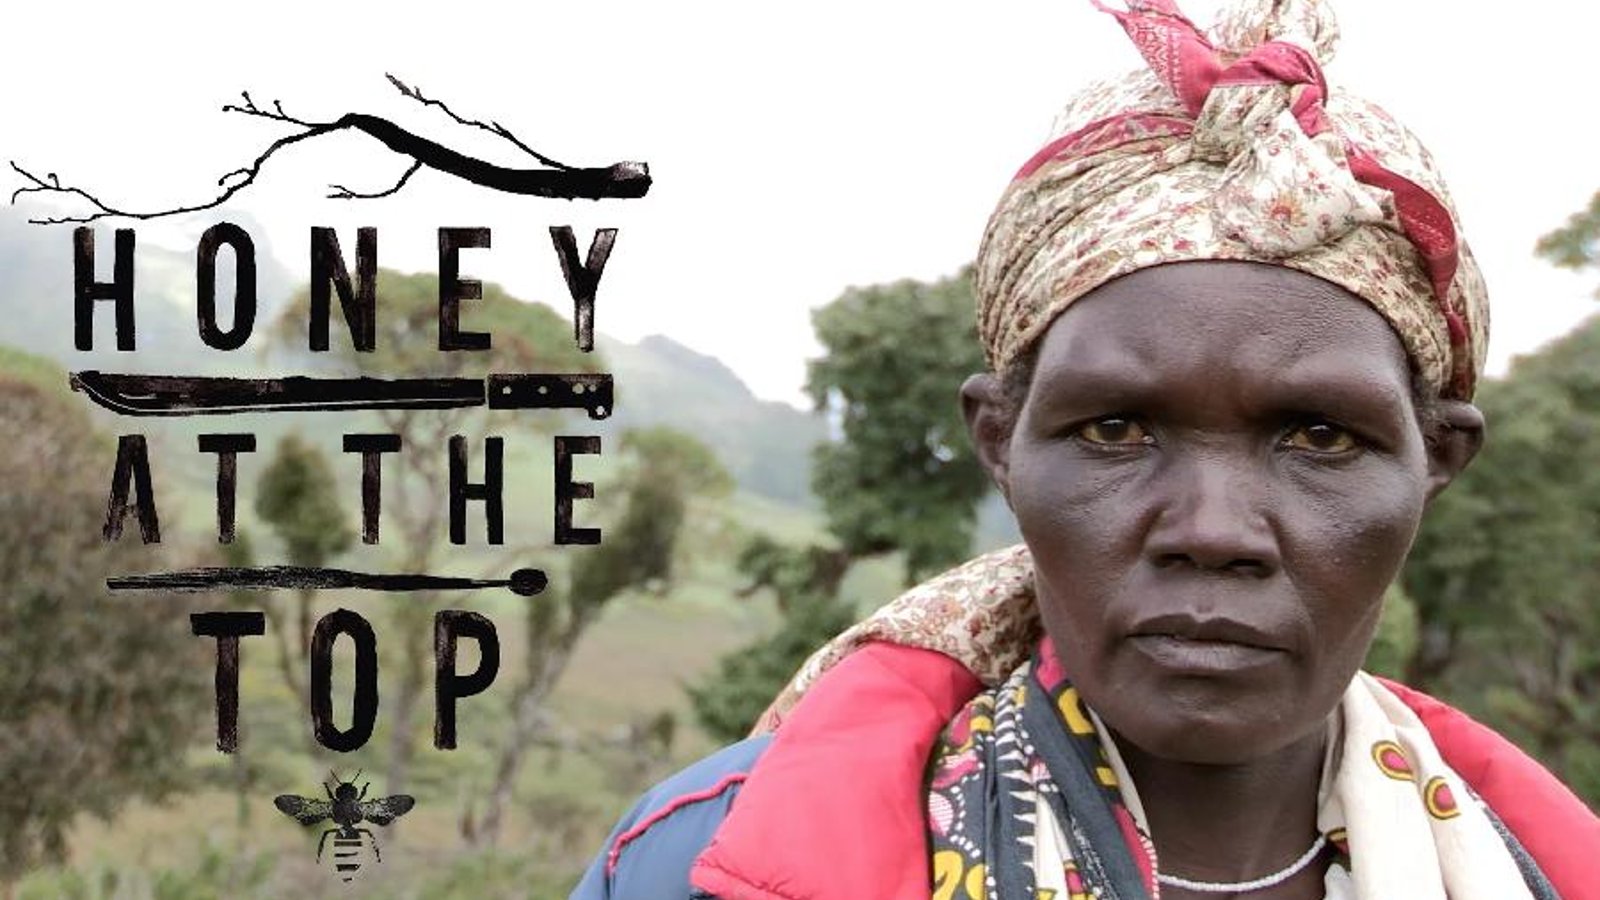 Honey at the Top - Kenyan Natives Fight for their Land